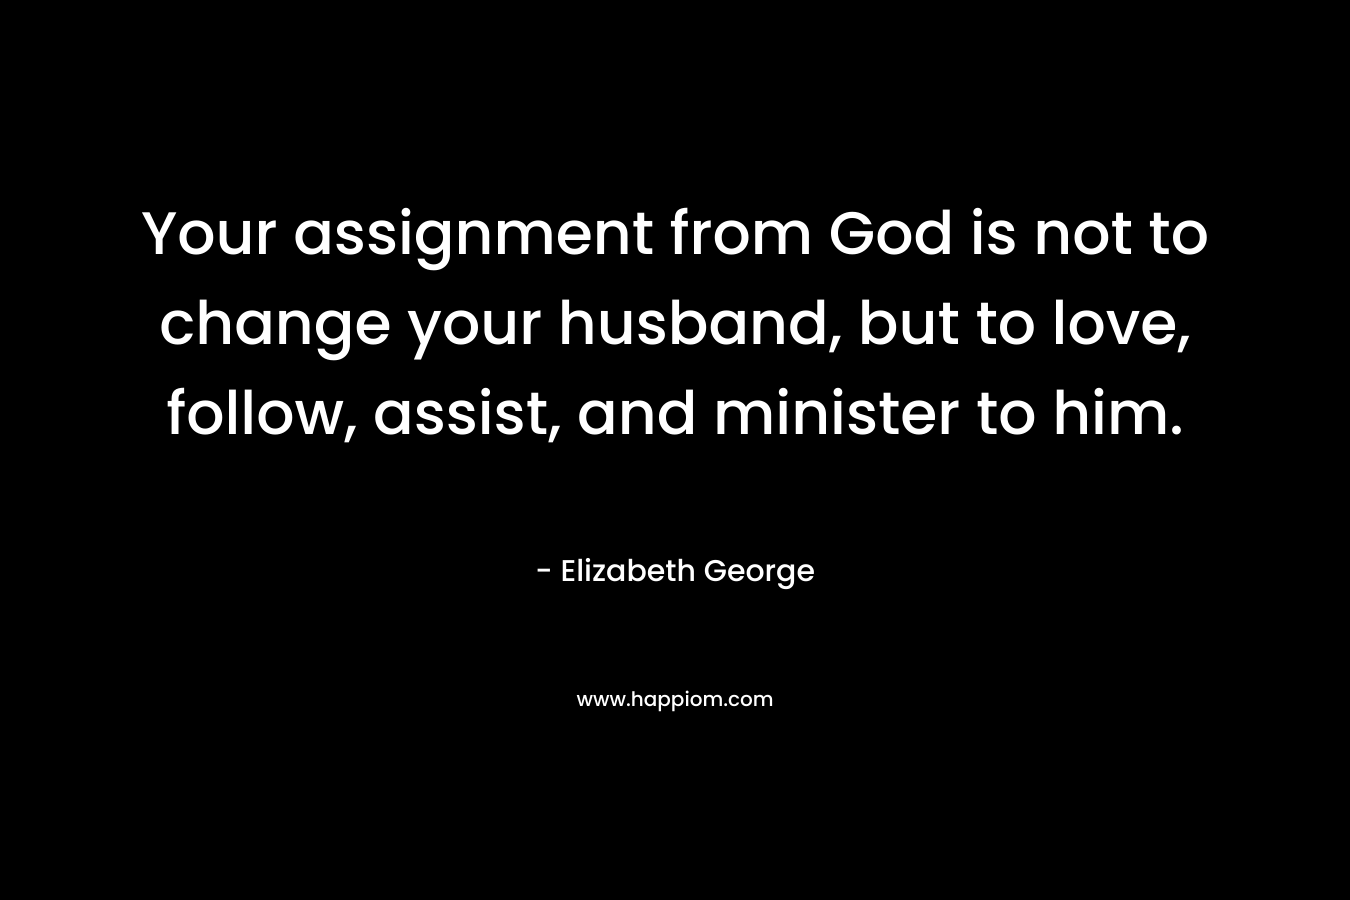 Your assignment from God is not to change your husband, but to love, follow, assist, and minister to him.